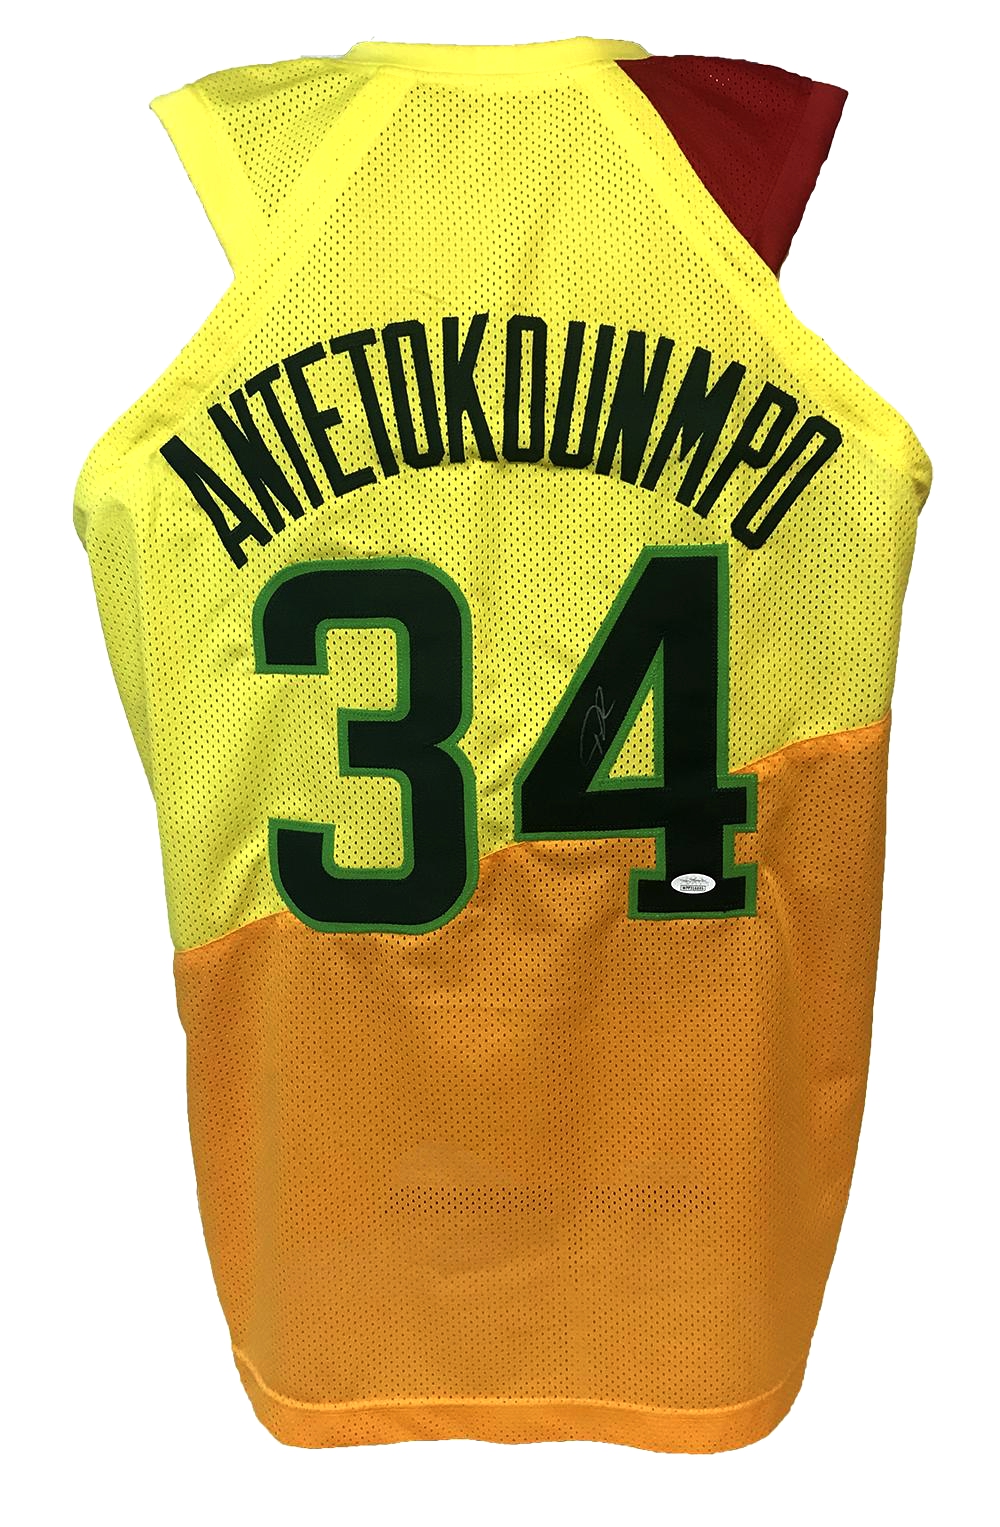 giannis yellow jersey